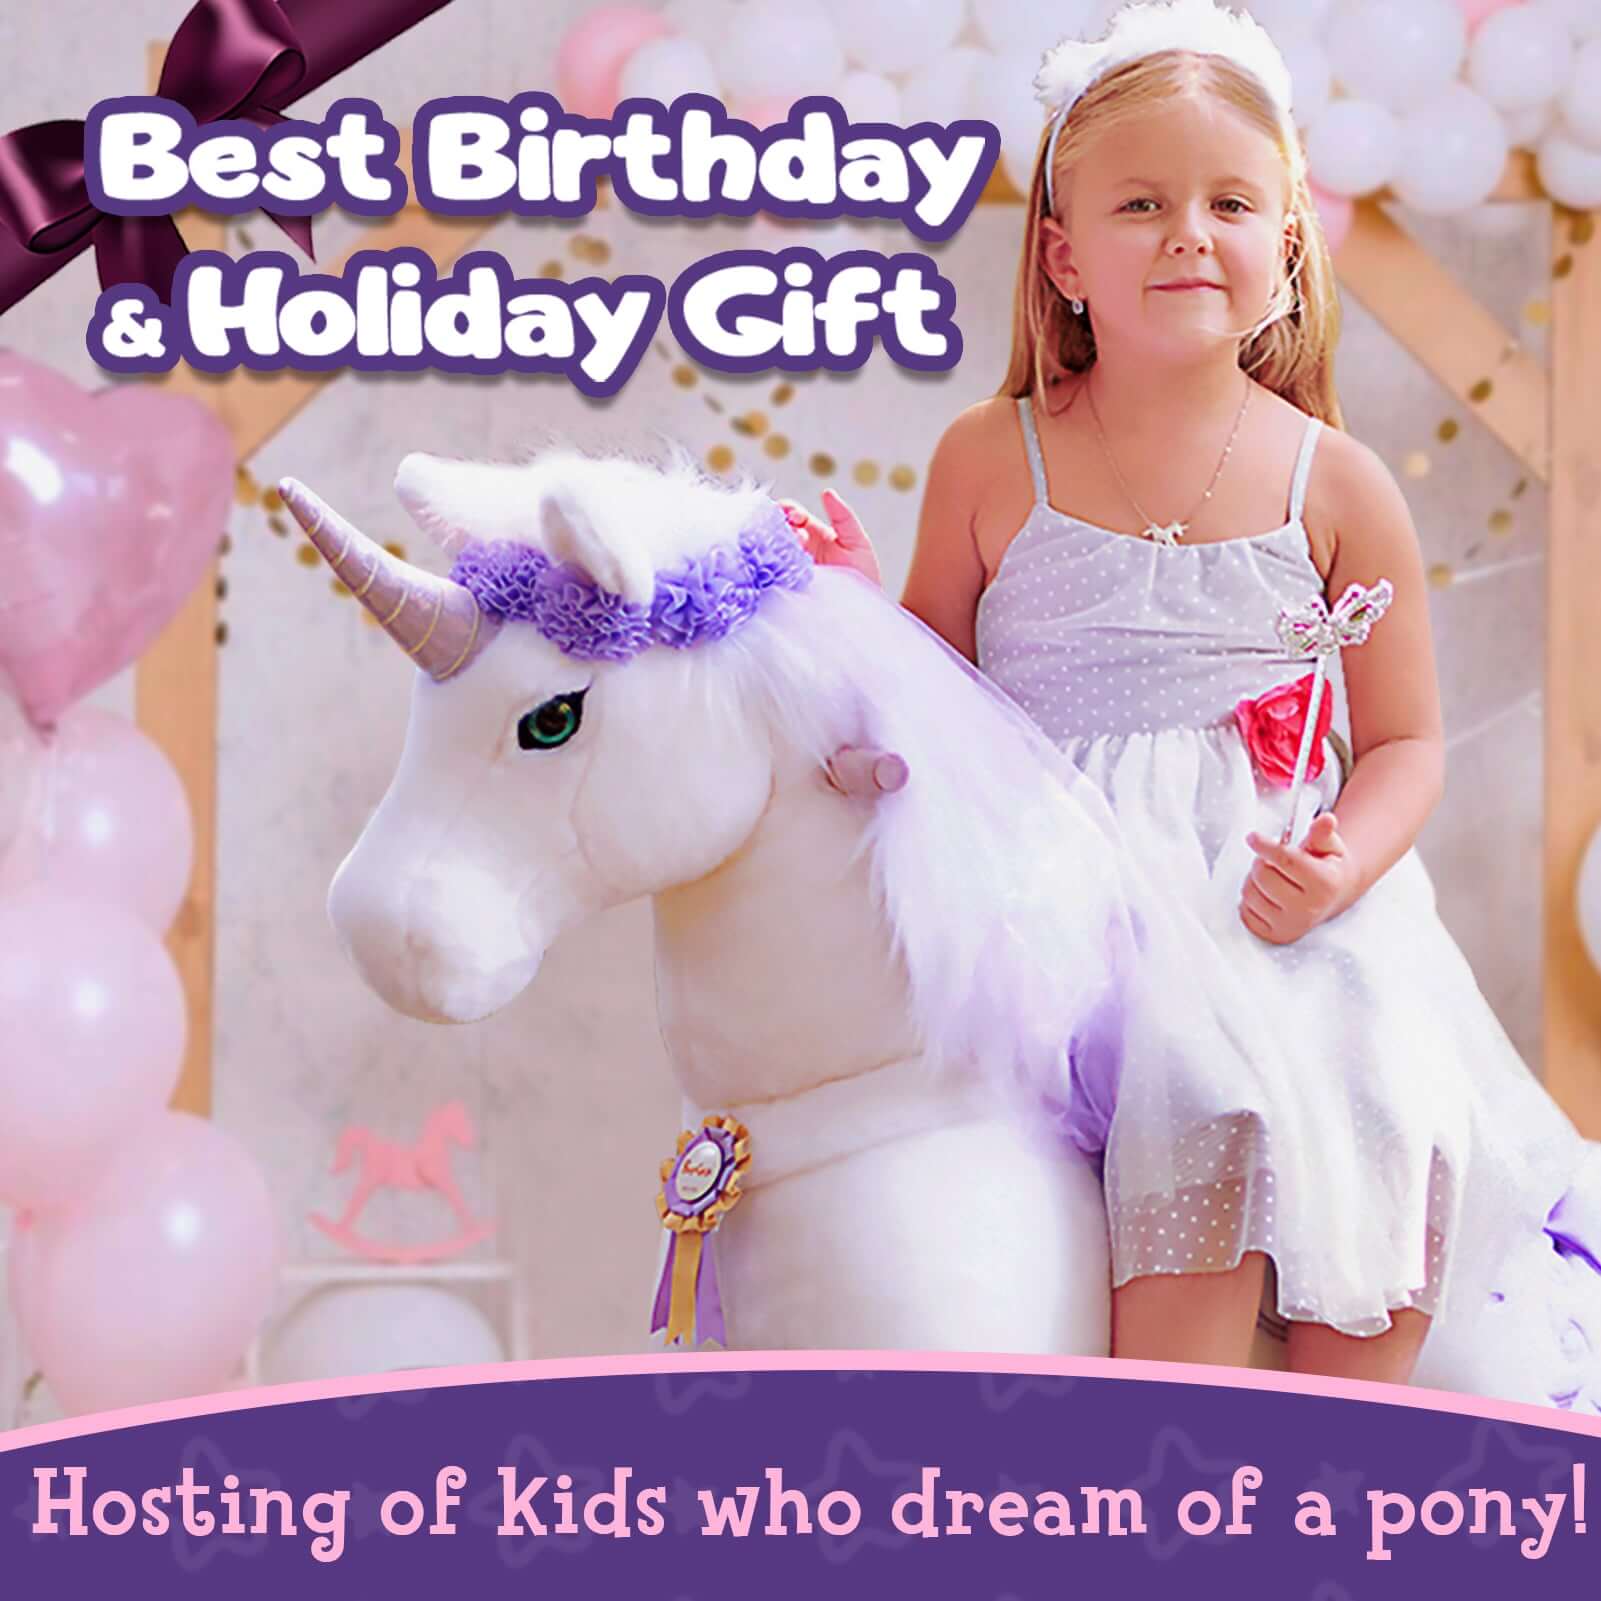 PonyCycle, Inc. PonyCycle K Purple Unicorn Ride-on Toy Age 4-8 (Accessories included)